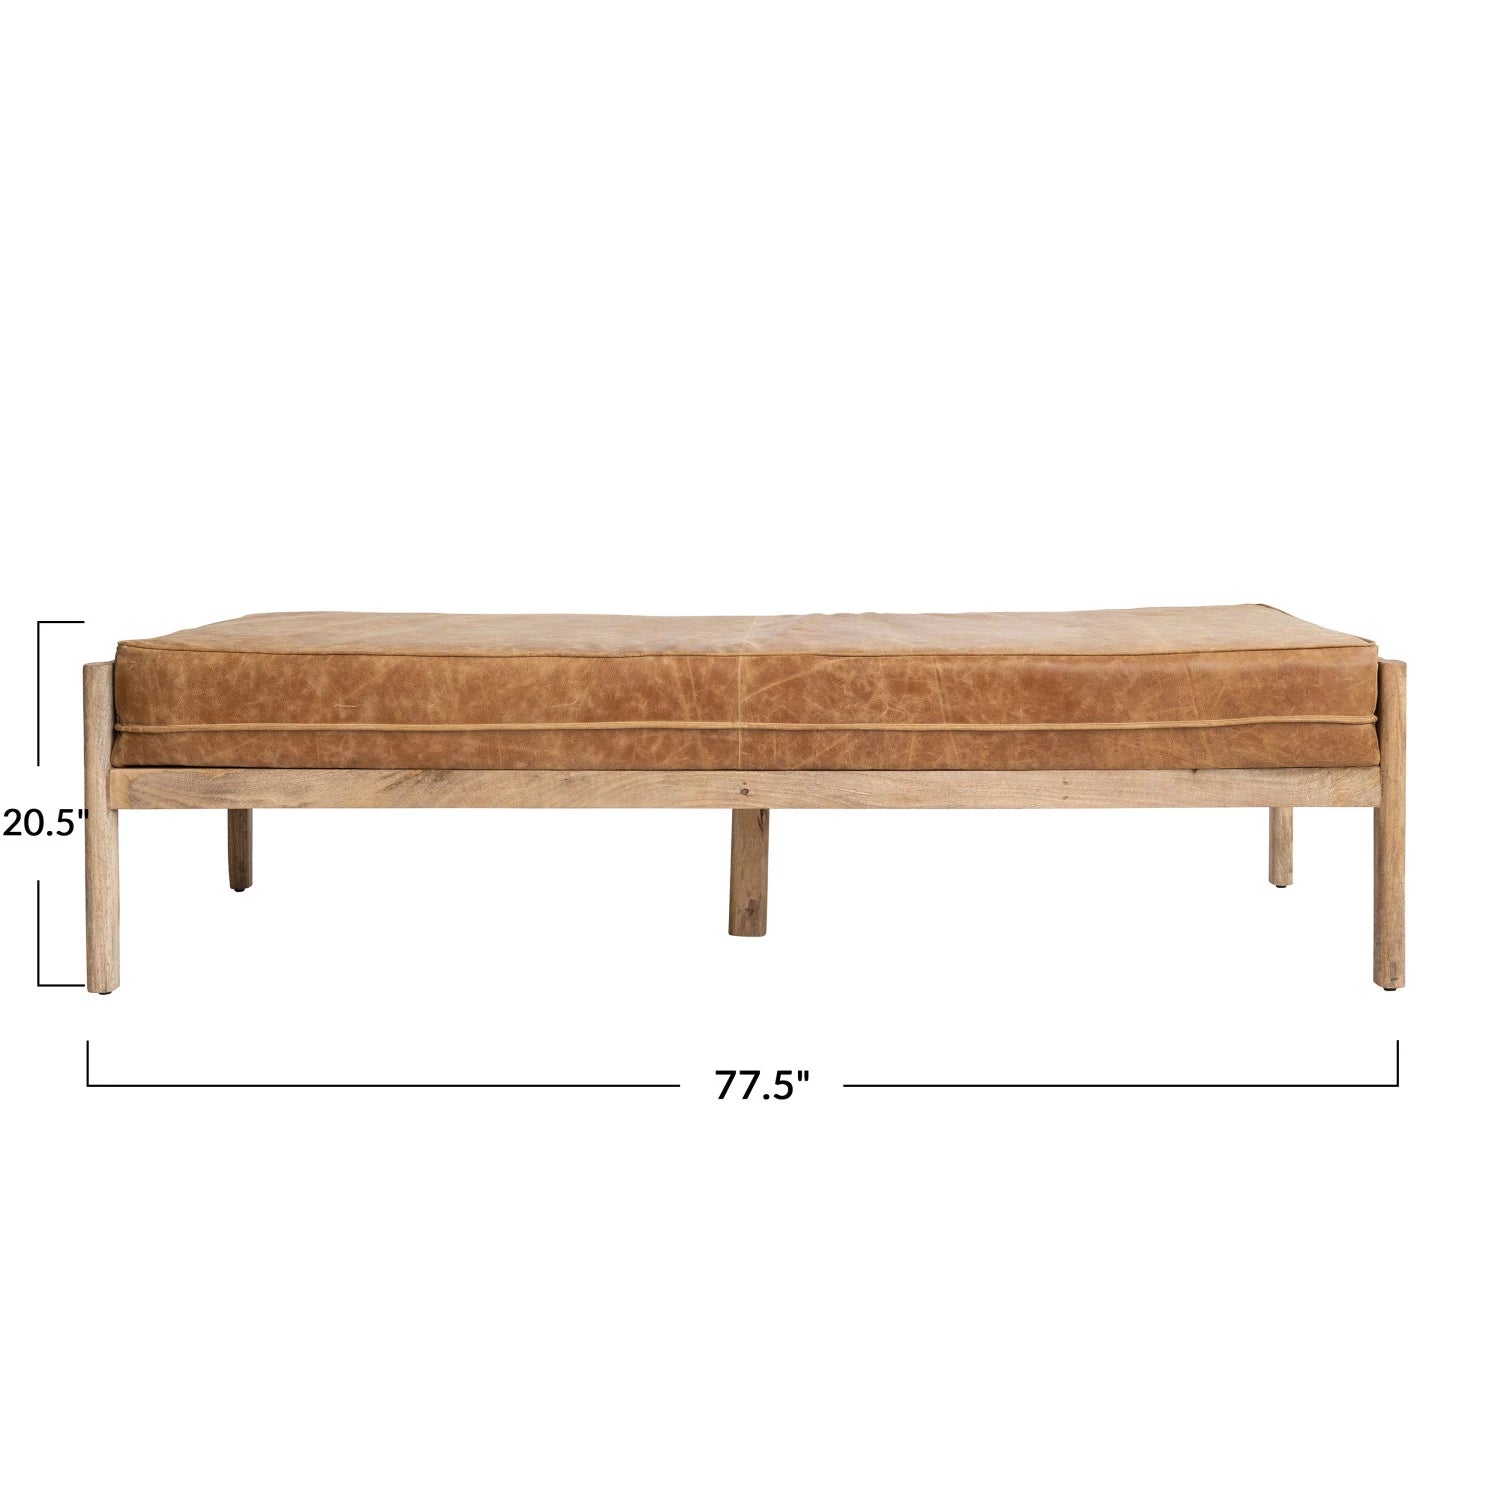 Mango Wood Day Bed/Bench with Distressed Leather Cushion